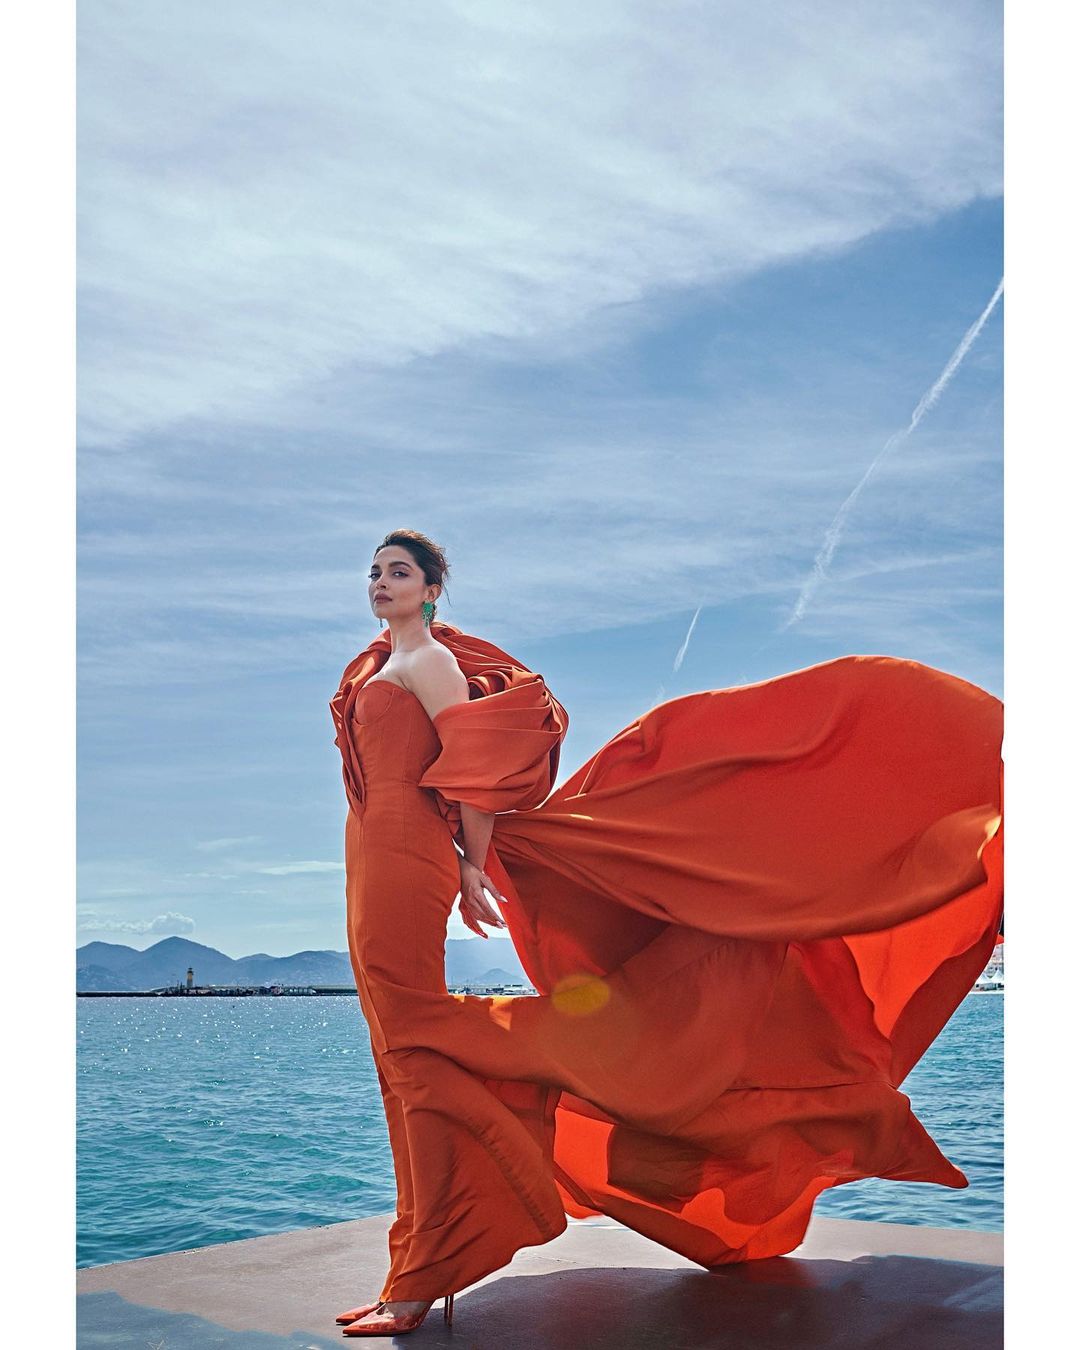 Cannes 2022: Deepika Padukone Looks Regal in Latest Louis Vuitton Outfit